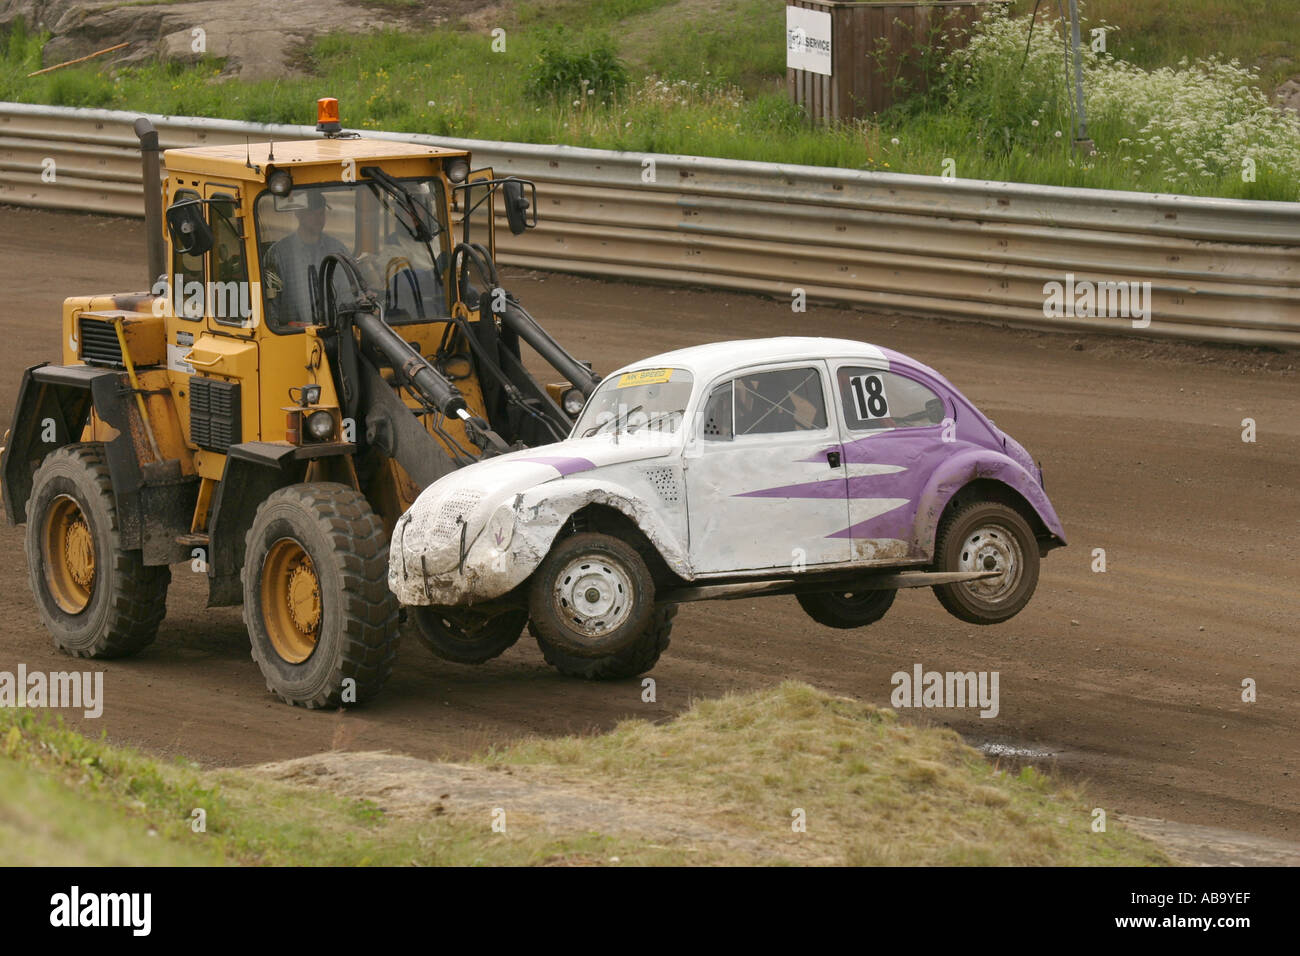 A Forklift Truck Is Carrying Away A Broken Car At A Stock Car Race Stock Photo Alamy